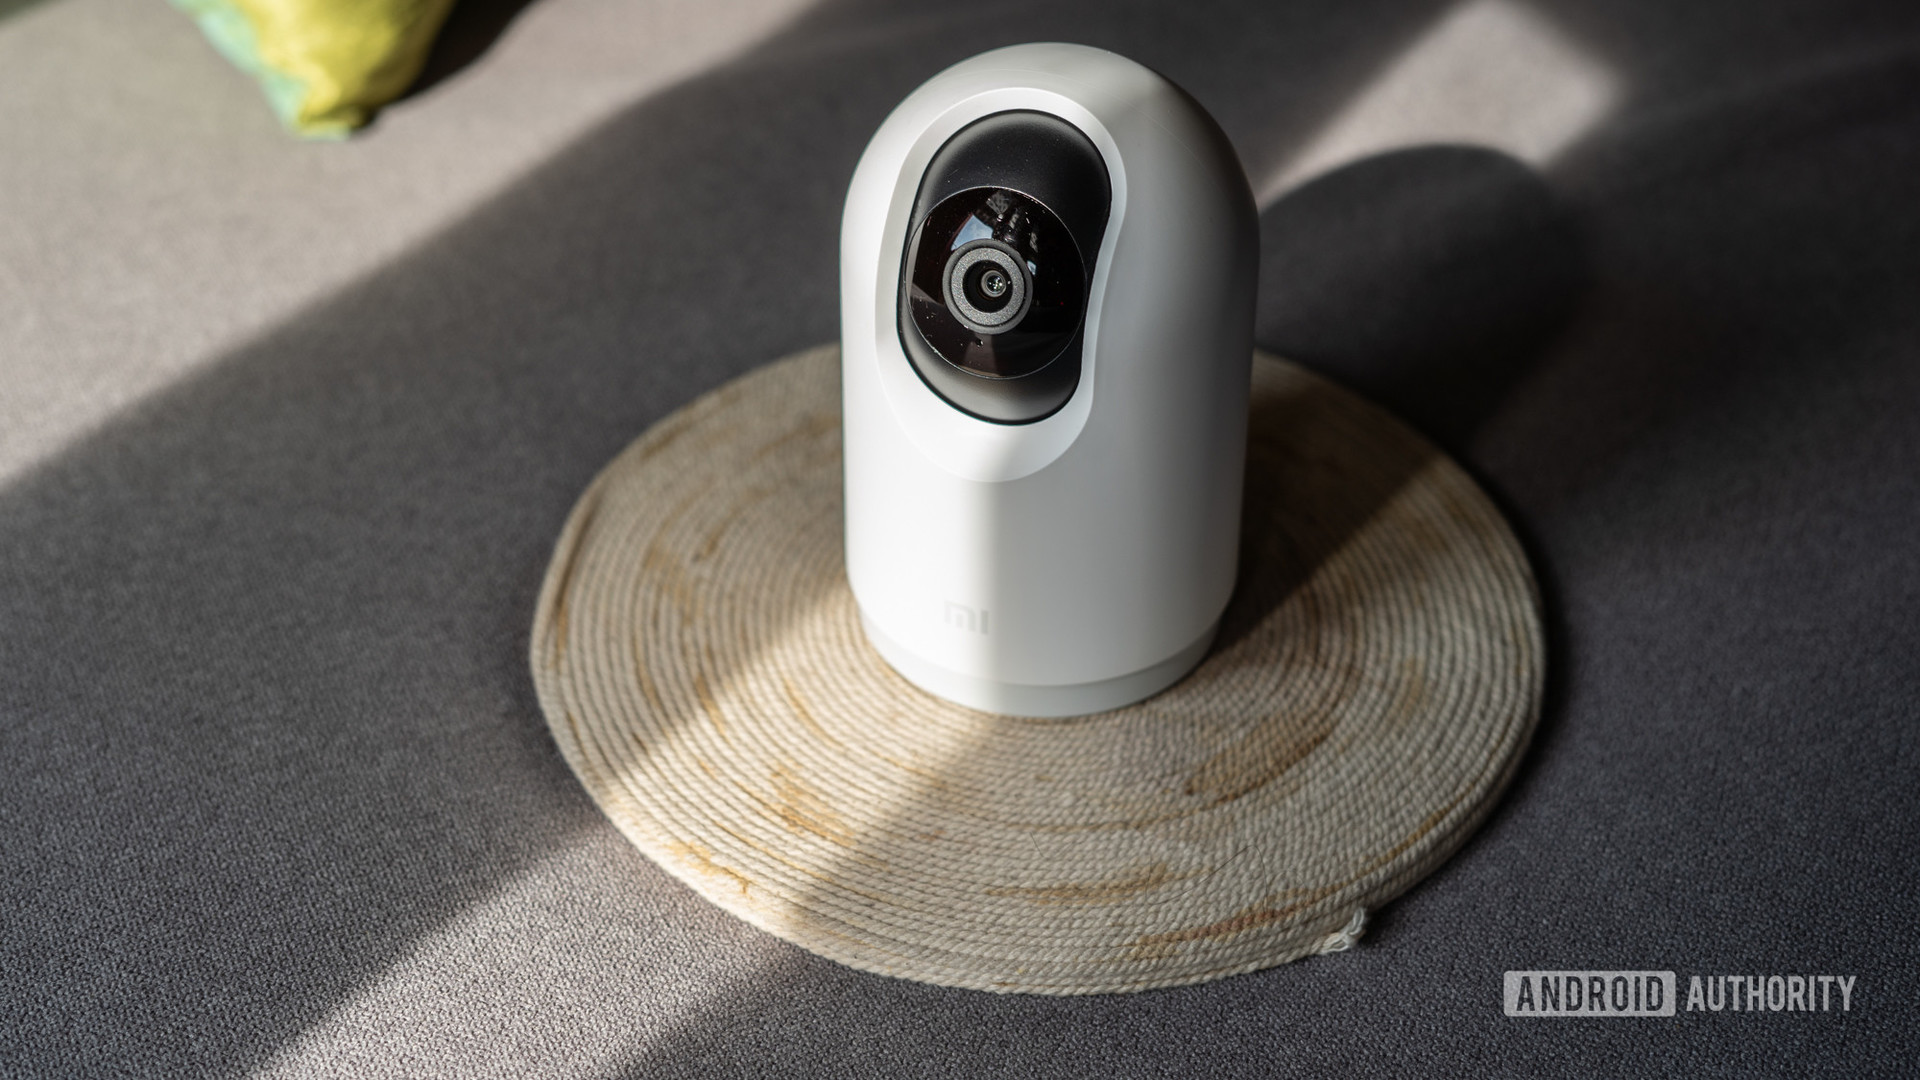 Mi 360 Home Security Camera 2K Pro front showing open lens